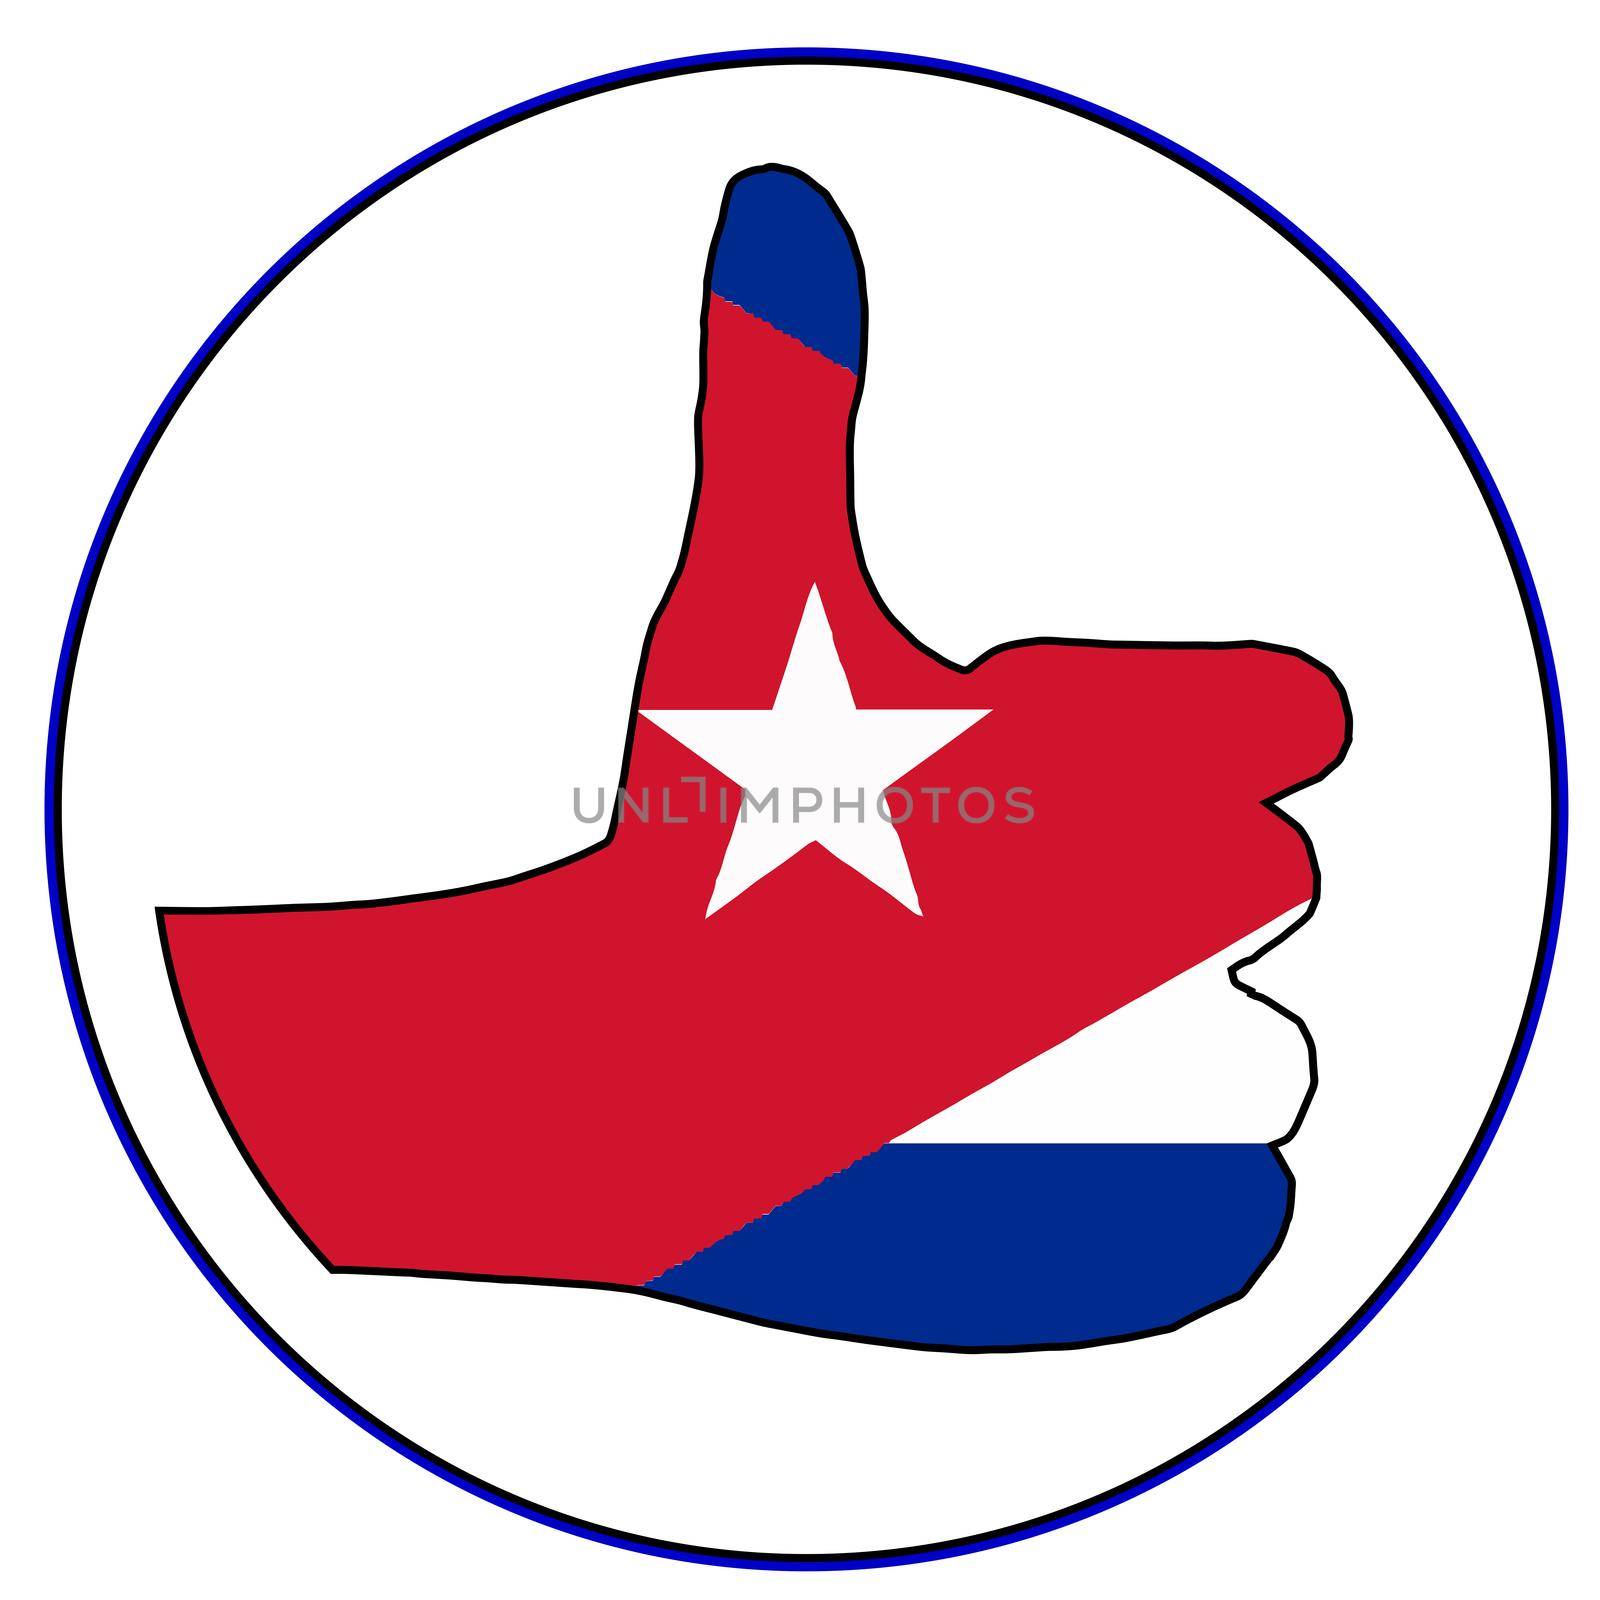 A Cuban flag hand giving the thumbs up sign all over a white background